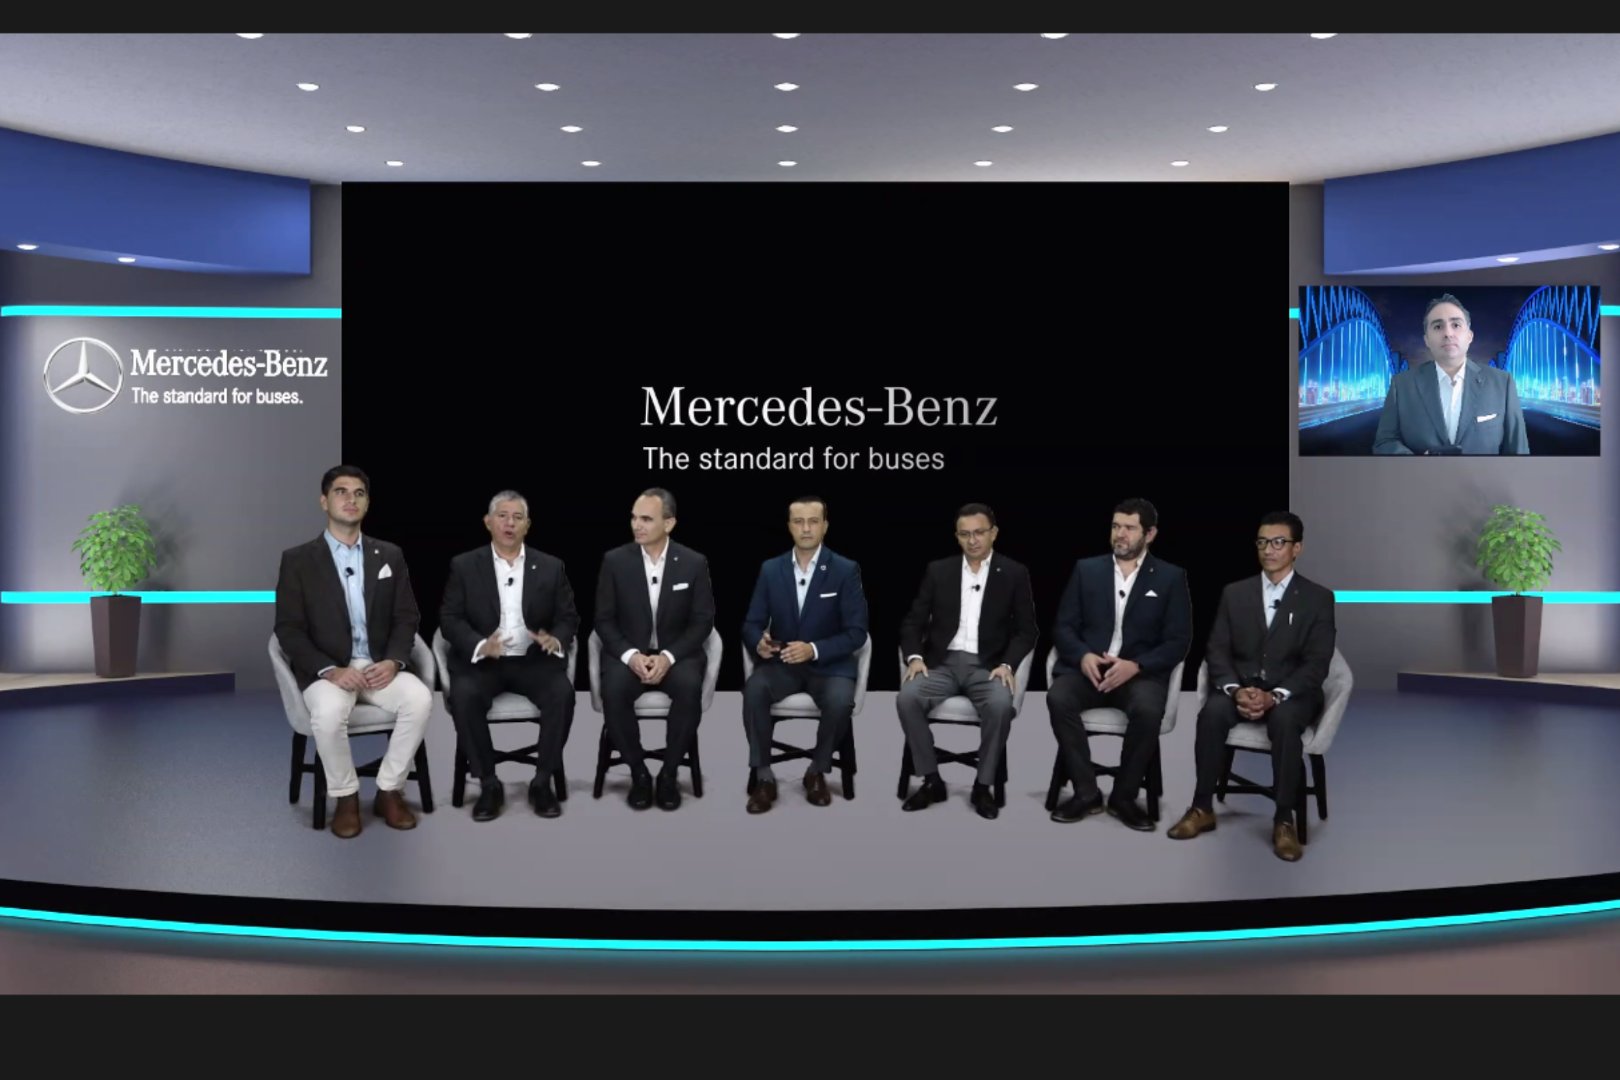 Mercedes-Benz Autobuses, Expo Virtual, “Leading The Road”